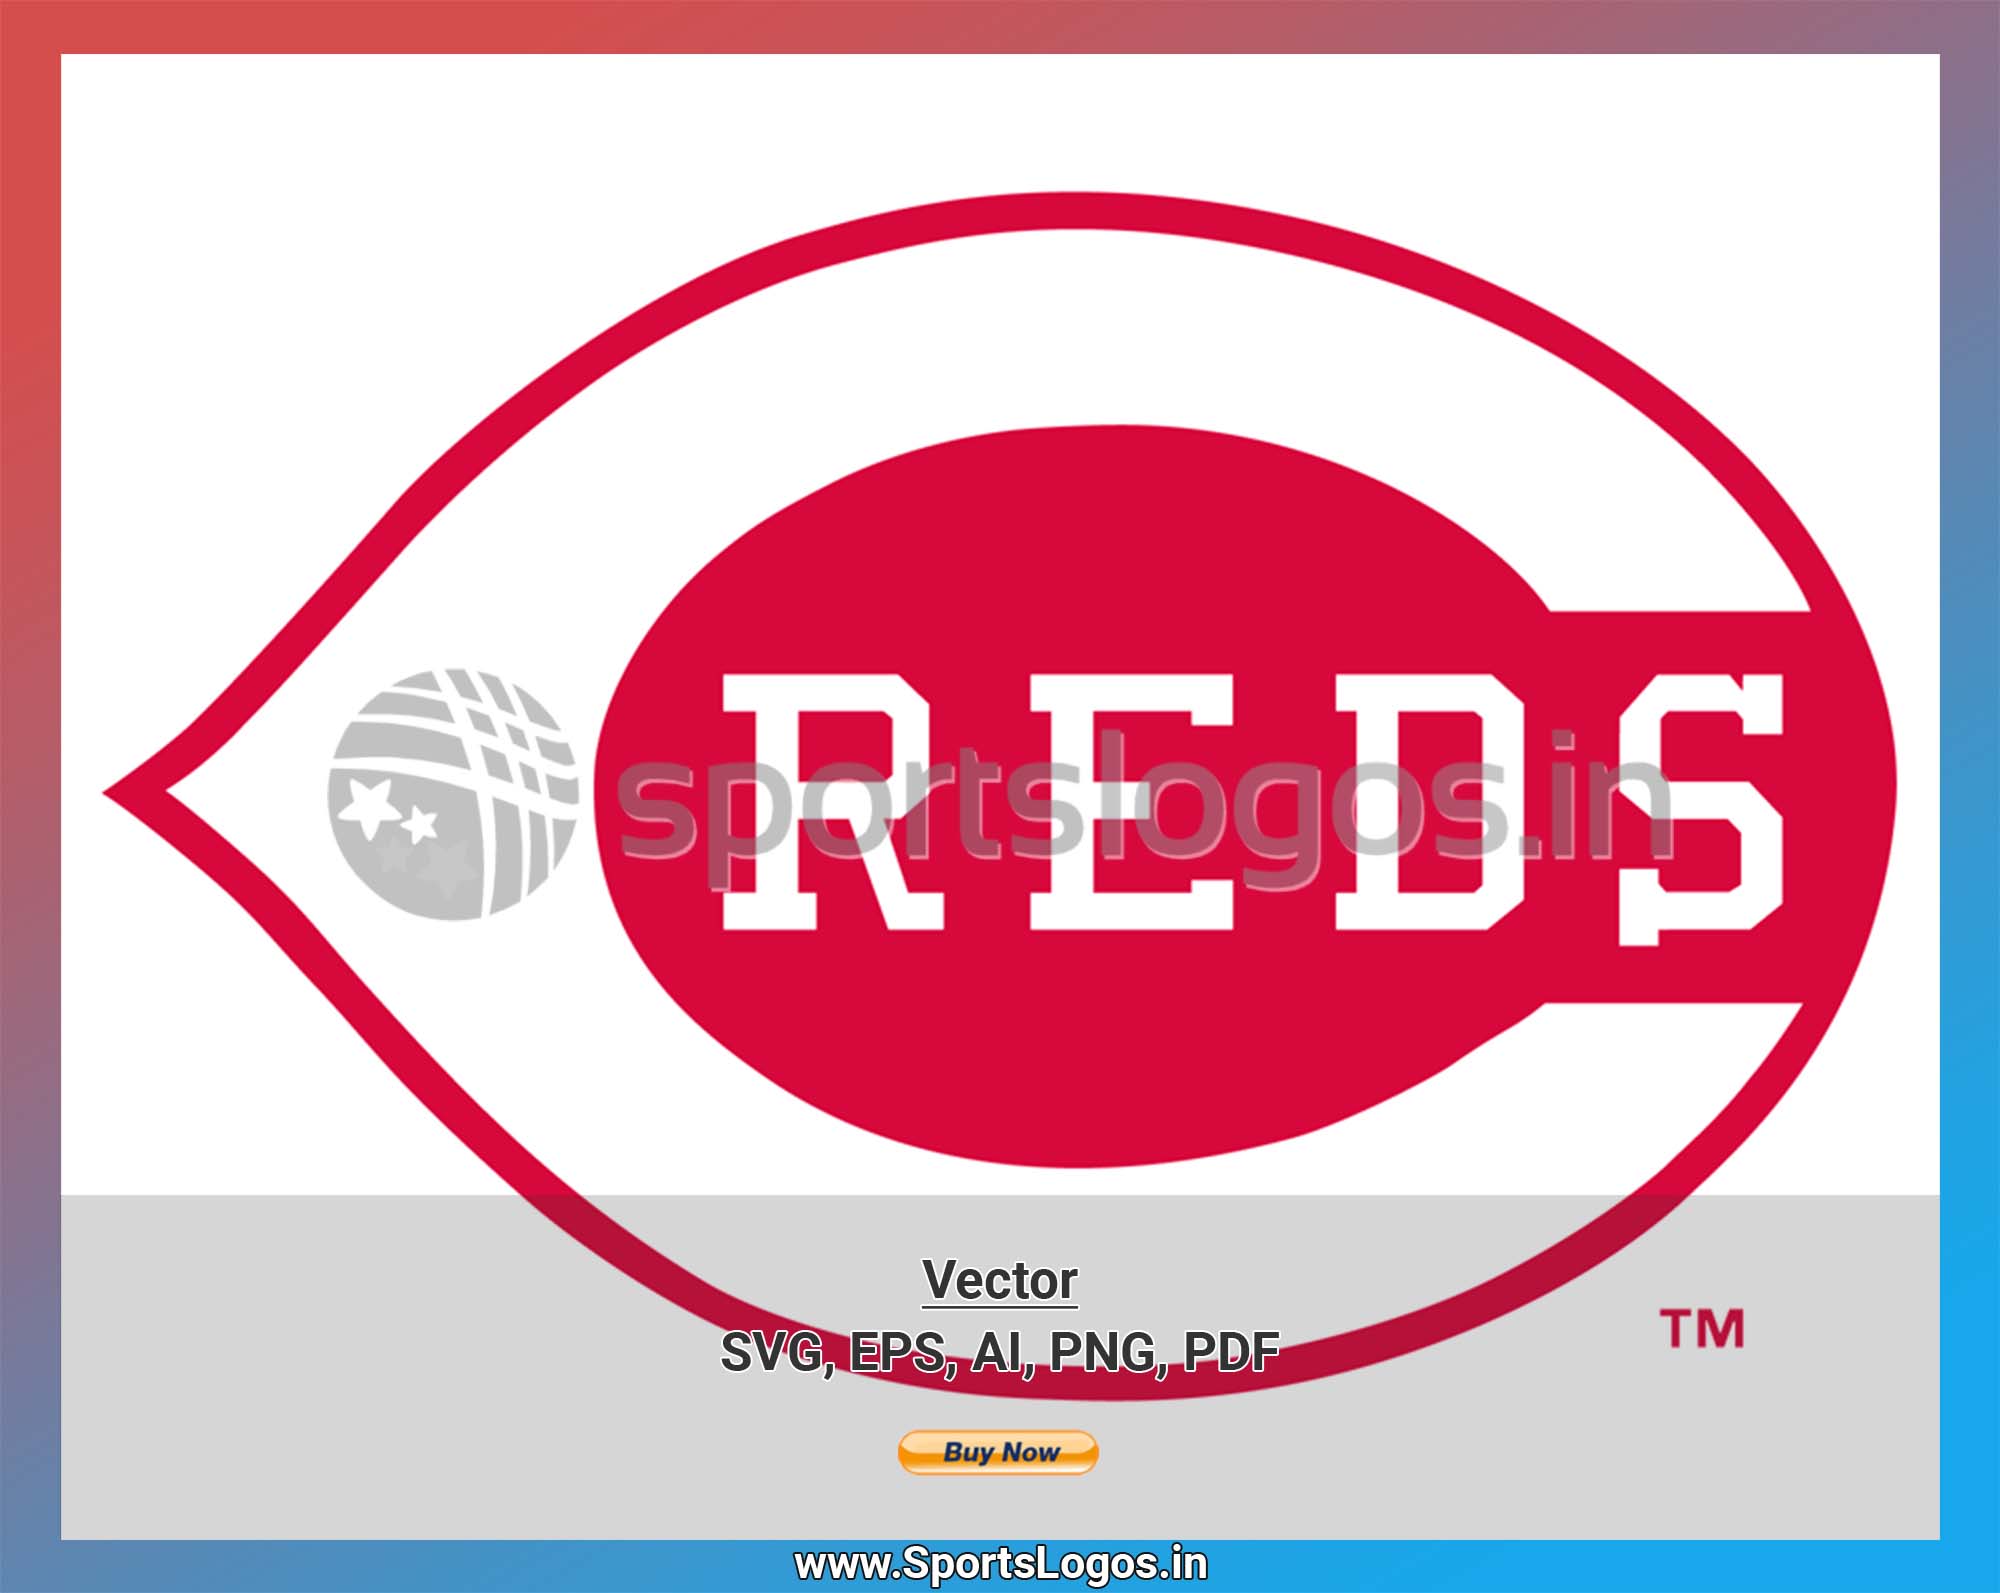 Cincinnati Reds - Baseball Sports Vector SVG Logo in 5 formats - SPLN000888  • Sports Logos - Embroidery & Vector for NFL, NBA, NHL, MLB, MiLB, and more!